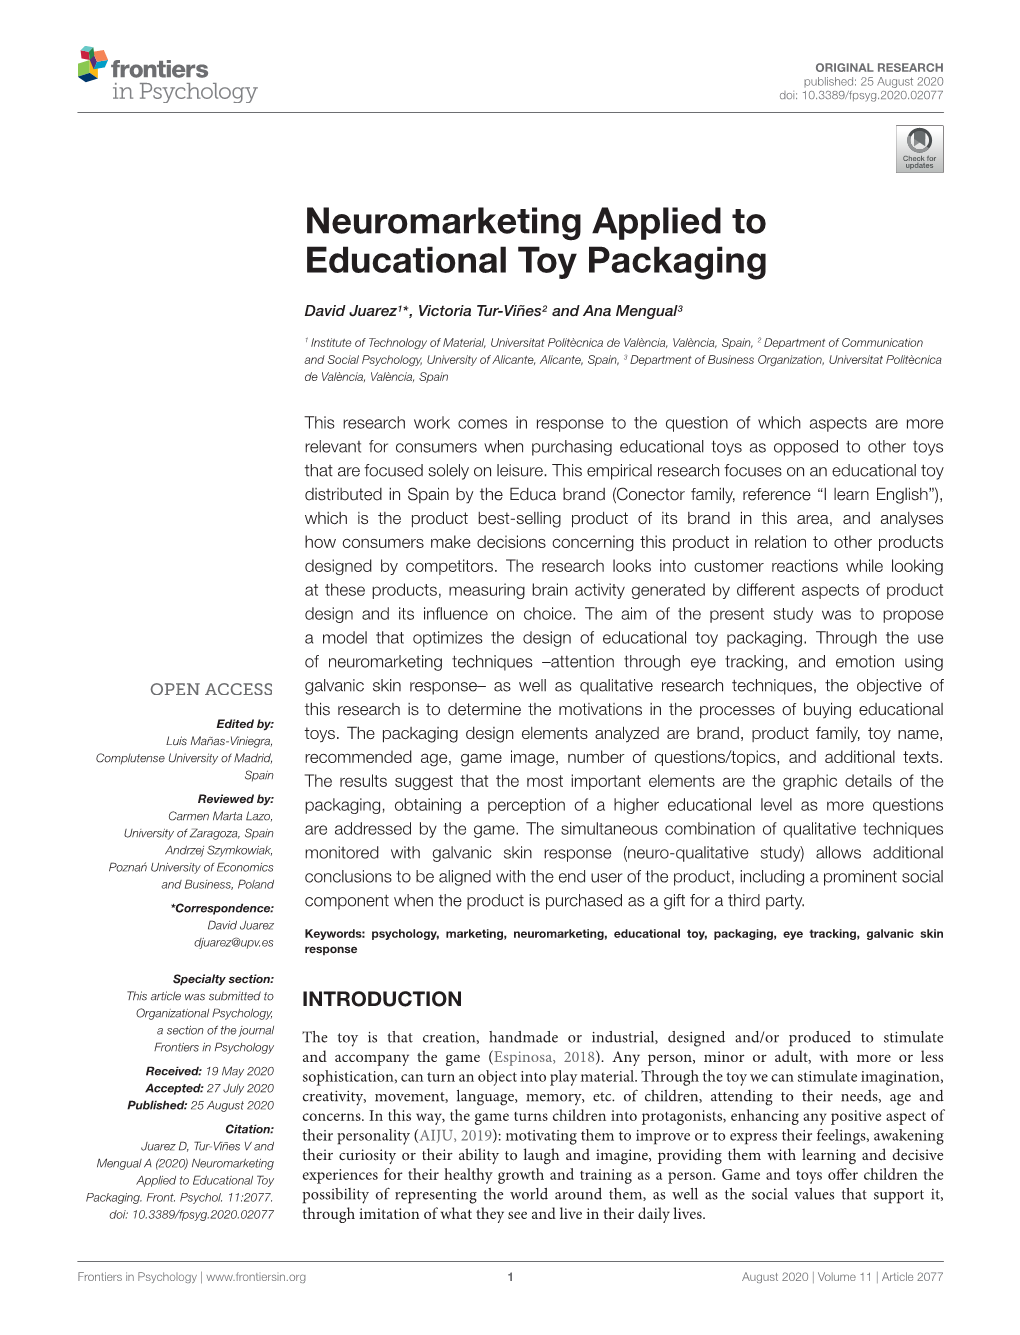 Neuromarketing Applied to Educational Toy Packaging